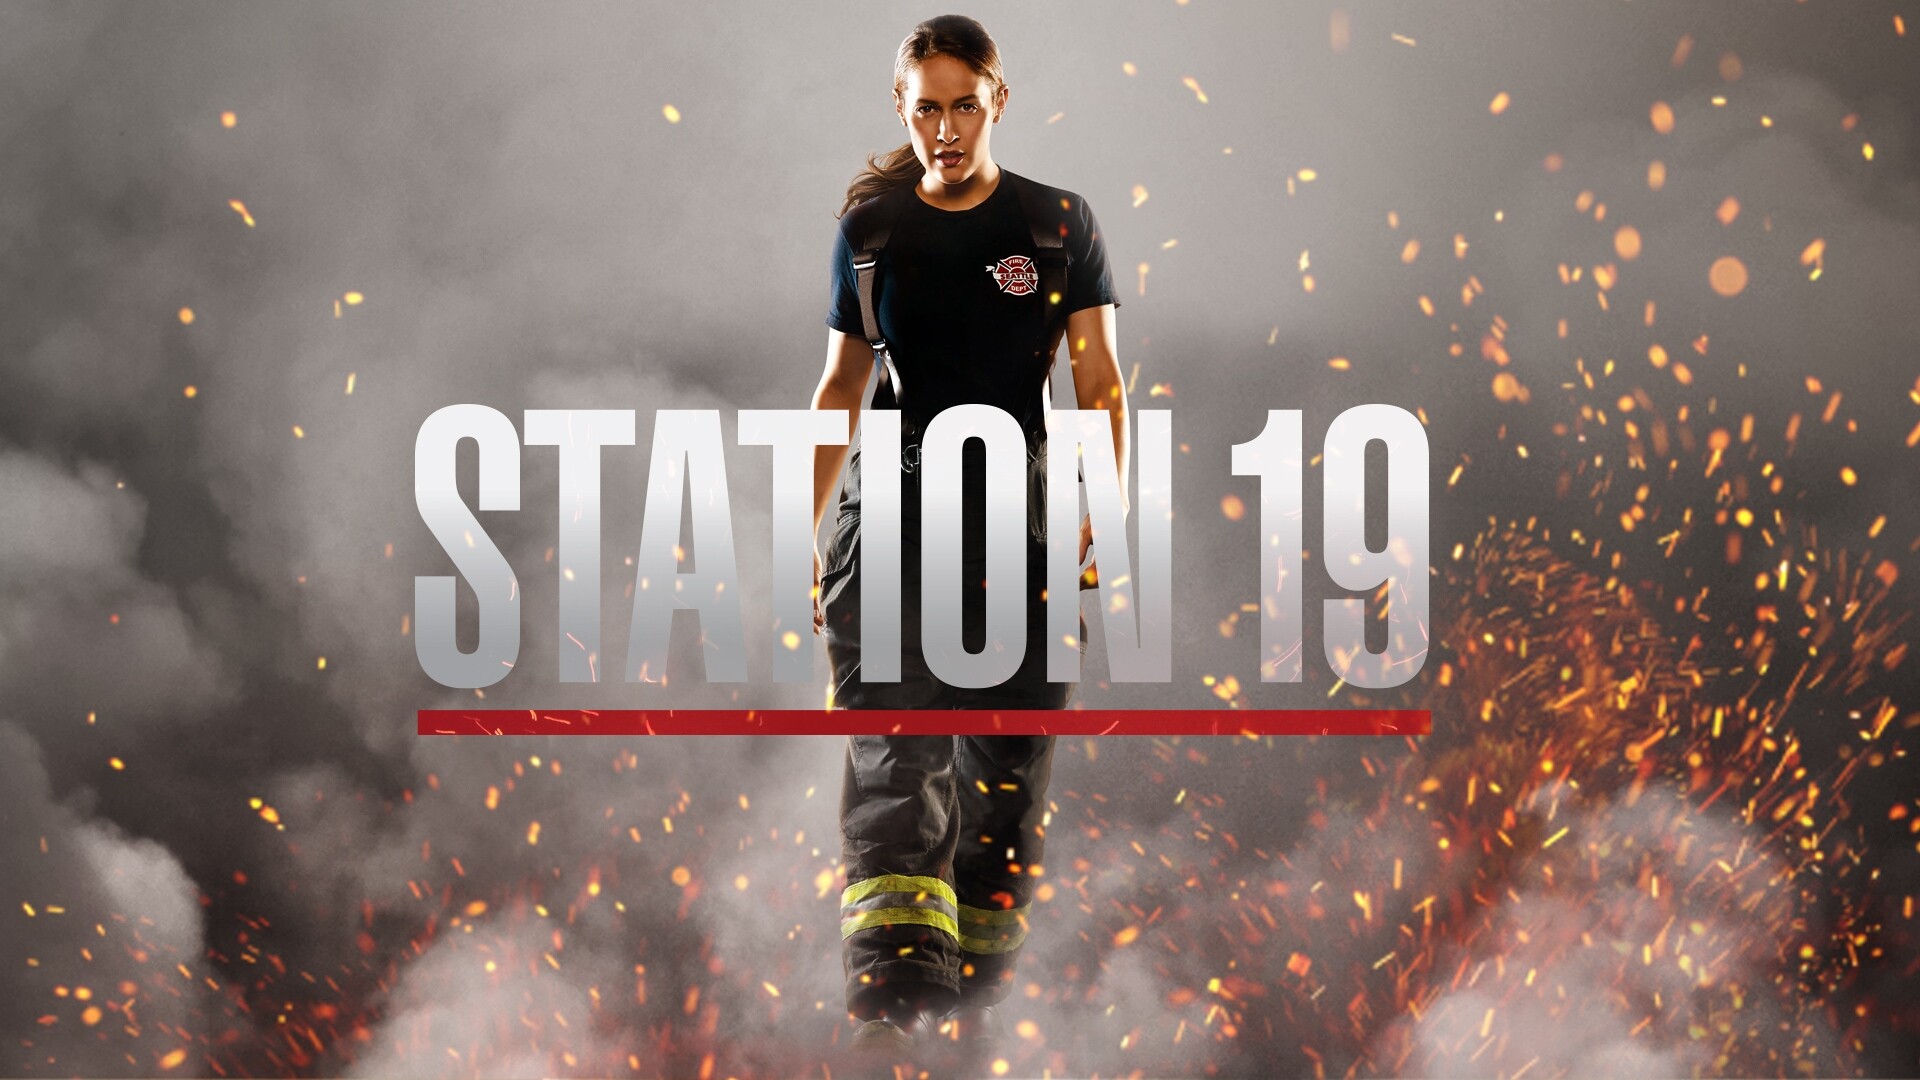 Station 19 (TV Series): Commercial Poster, Introduction Of The Series, Fictional Characters, Firewoman, Seattle Fire Dept. 1920x1080 Full HD Wallpaper.